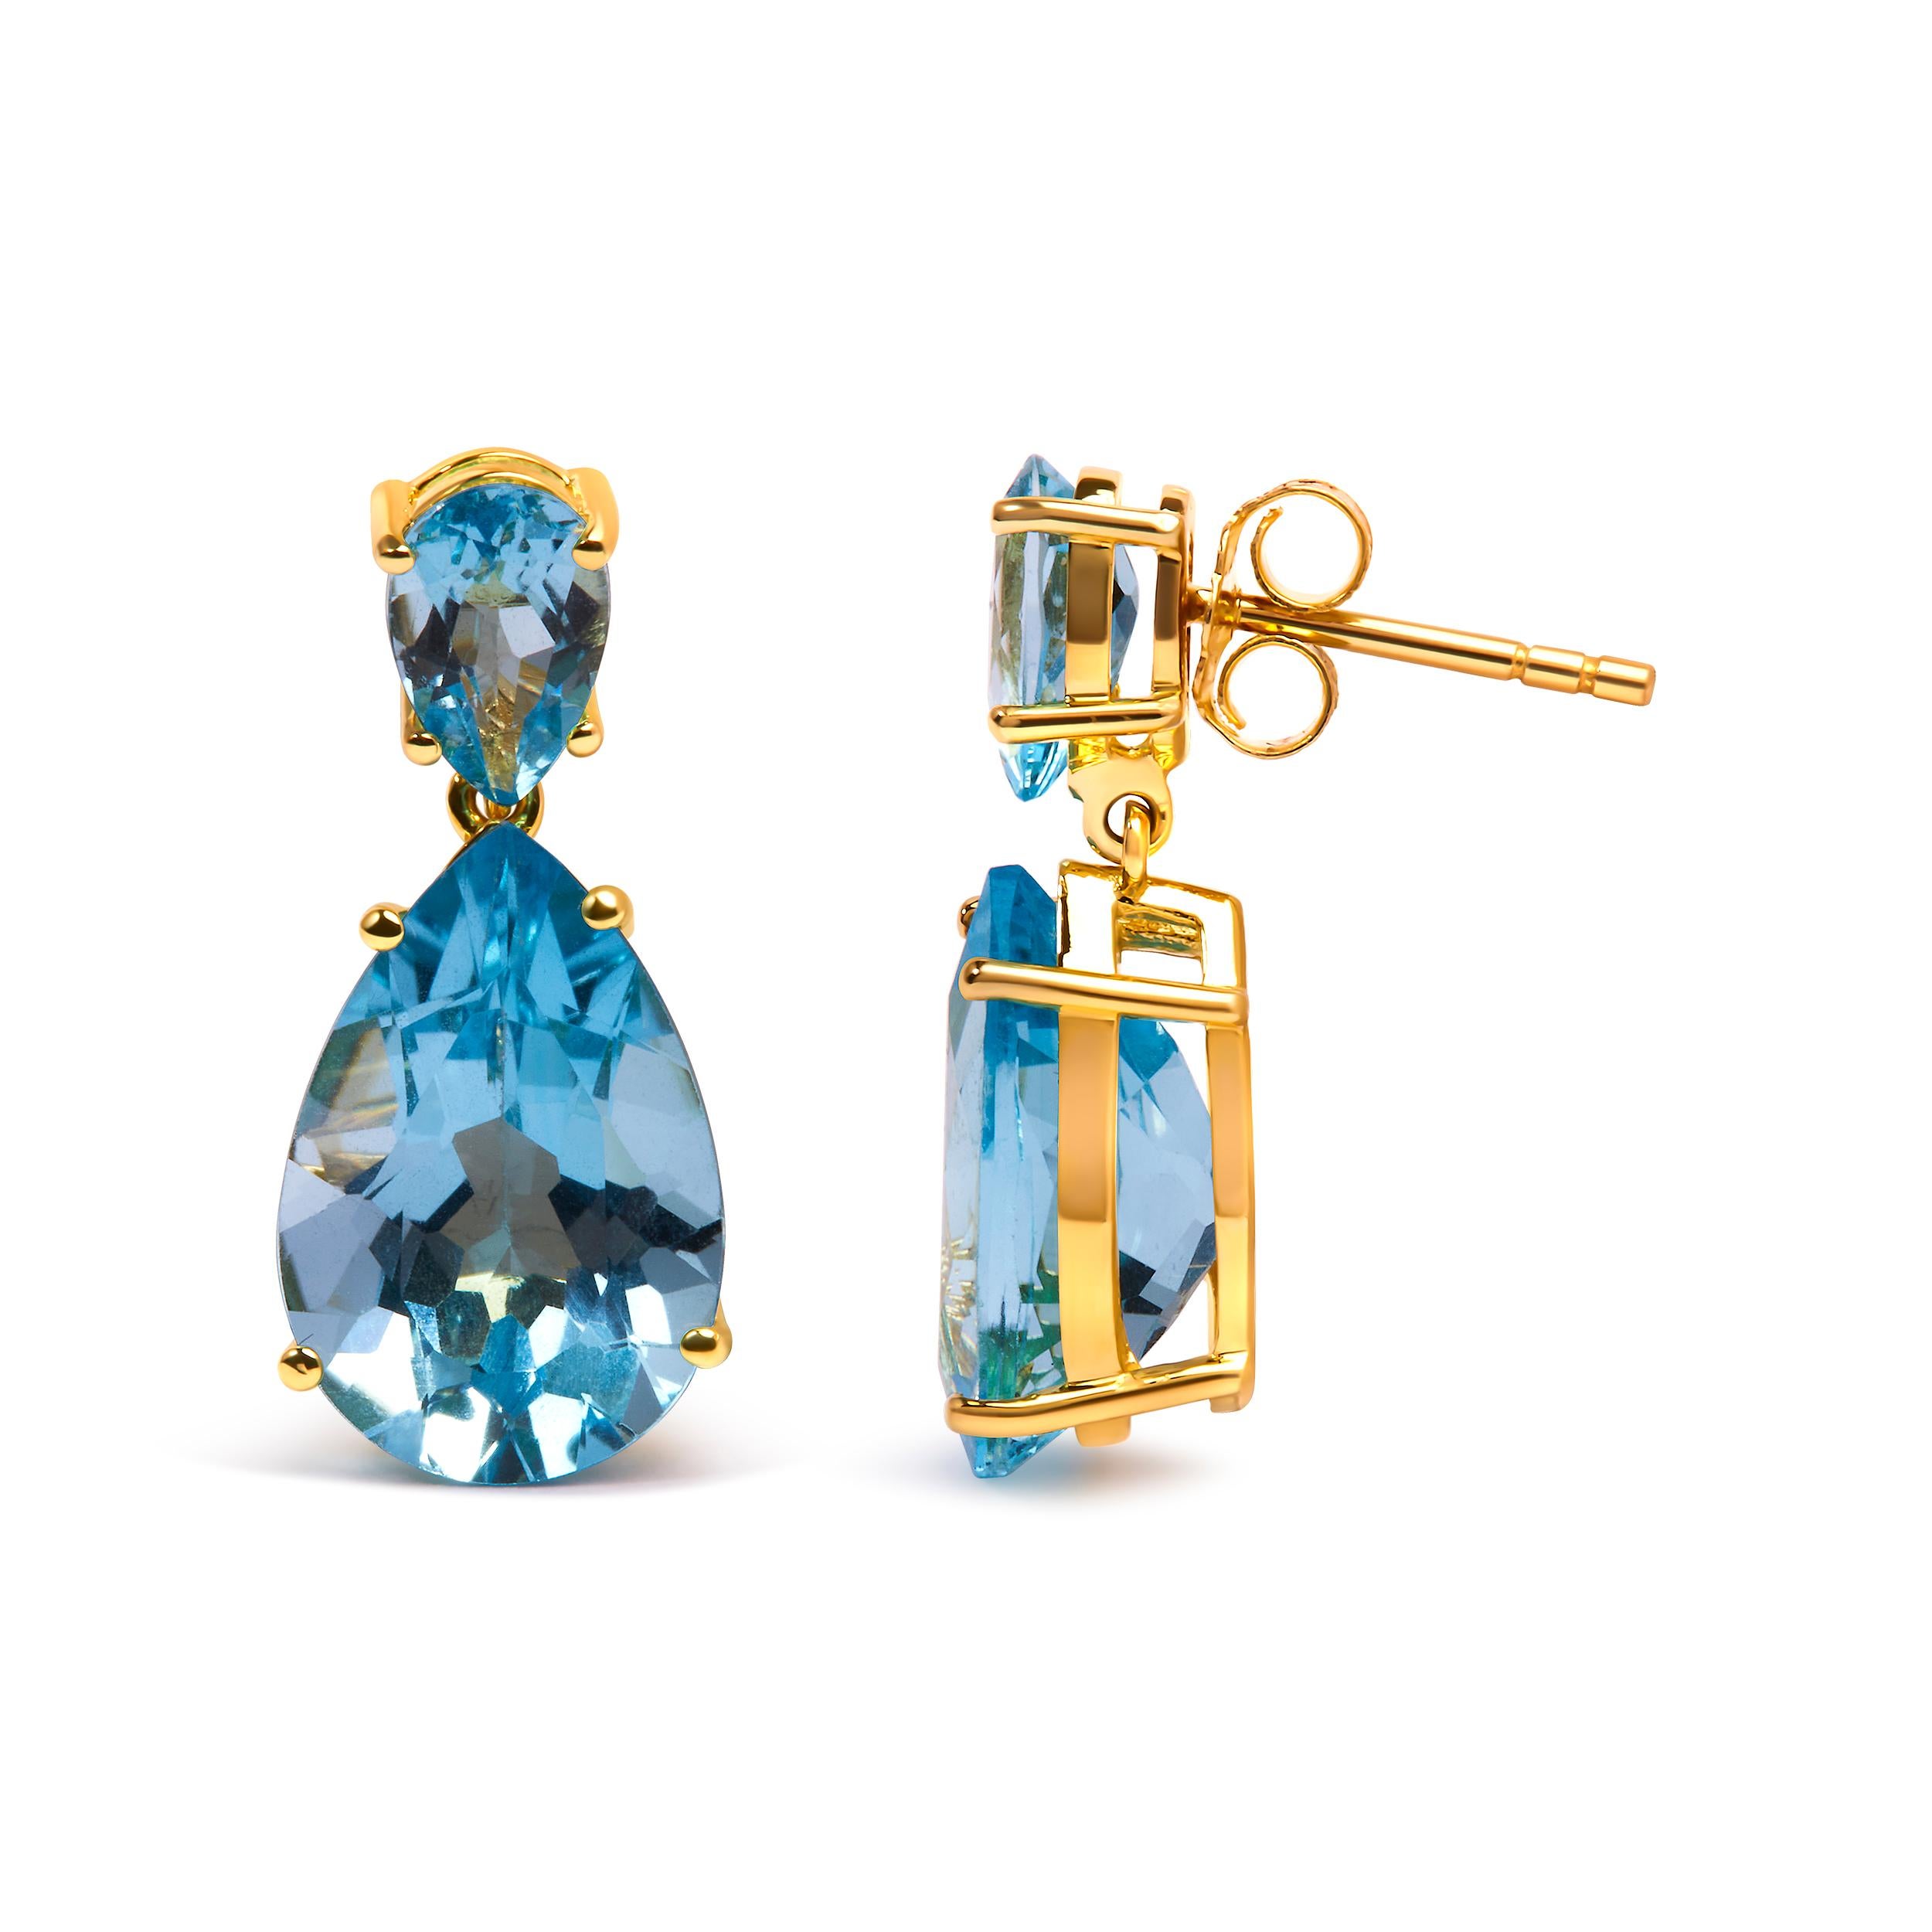 Indulge in the ethereal beauty of these exquisite earrings, crafted with utmost precision and adorned with captivating blue topaz gemstones. Made from 10K yellow gold plated .925 sterling silver, these dangle earrings showcase a mesmerizing